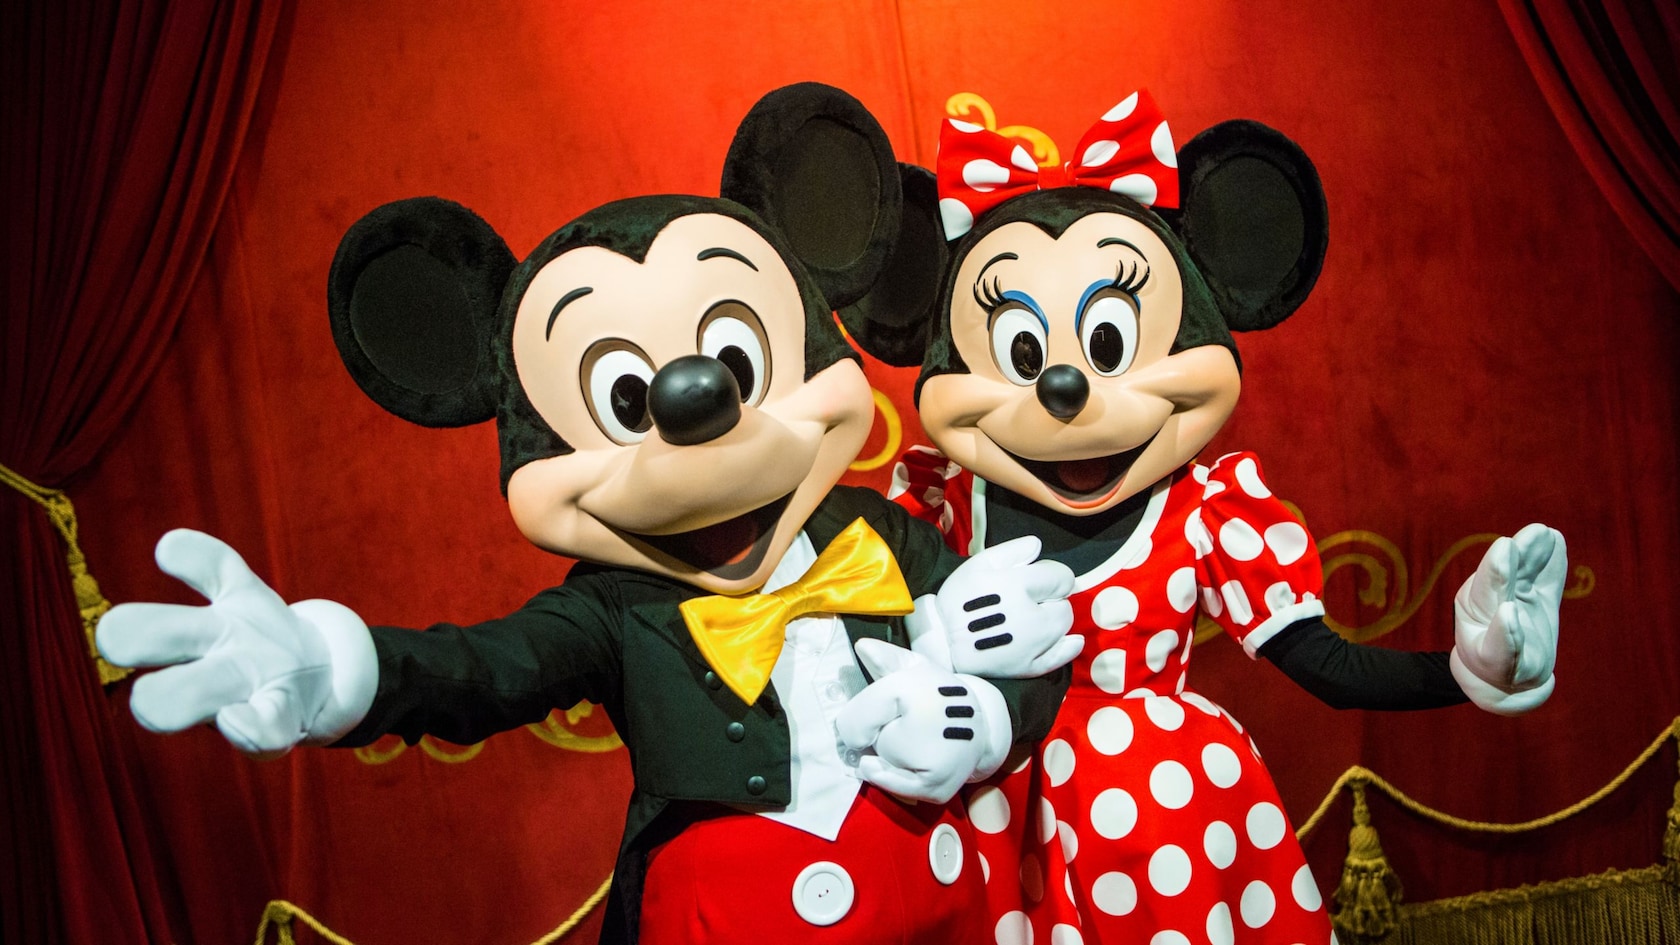 Mickey Mouse and Minnie Mouse link arms and pose for a picture